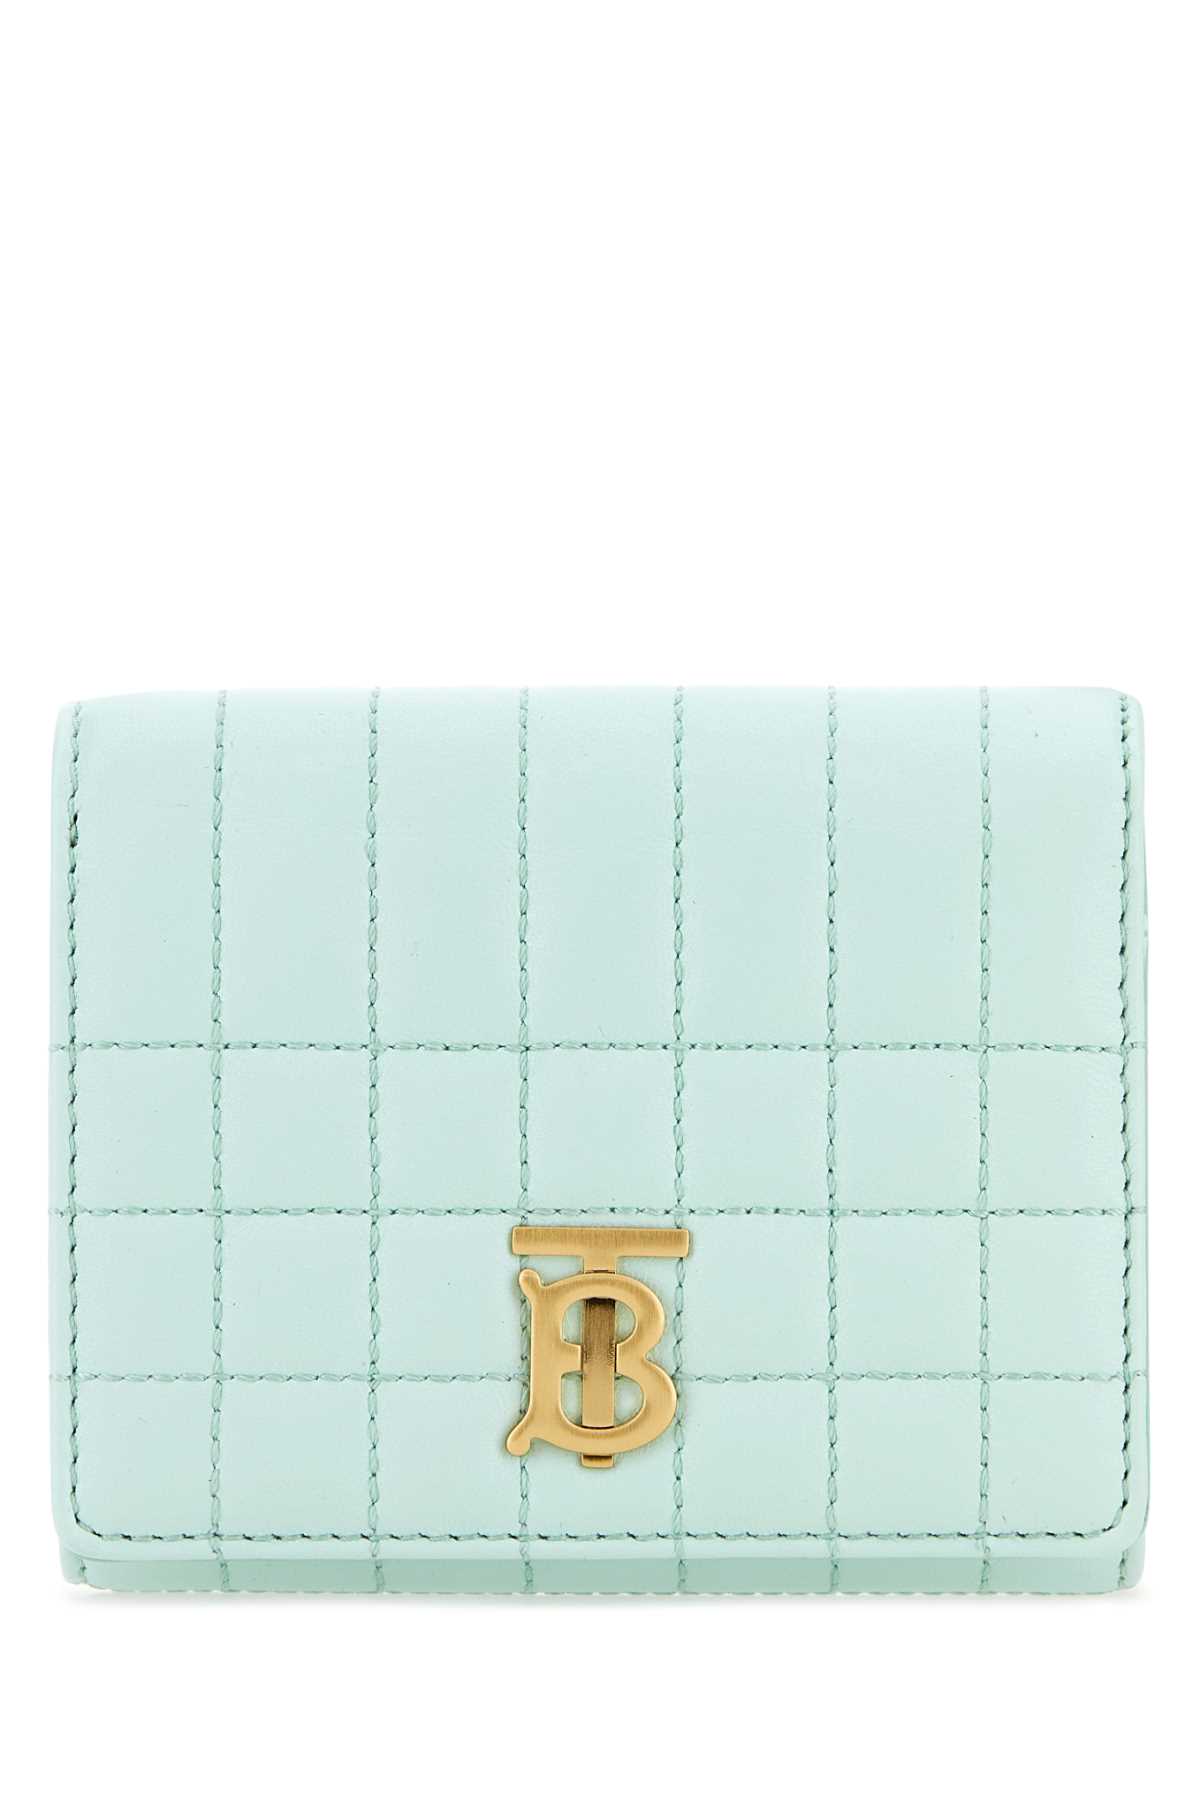 Burberry Pastel Light-blue Nappa Leather Small Lola Wallet